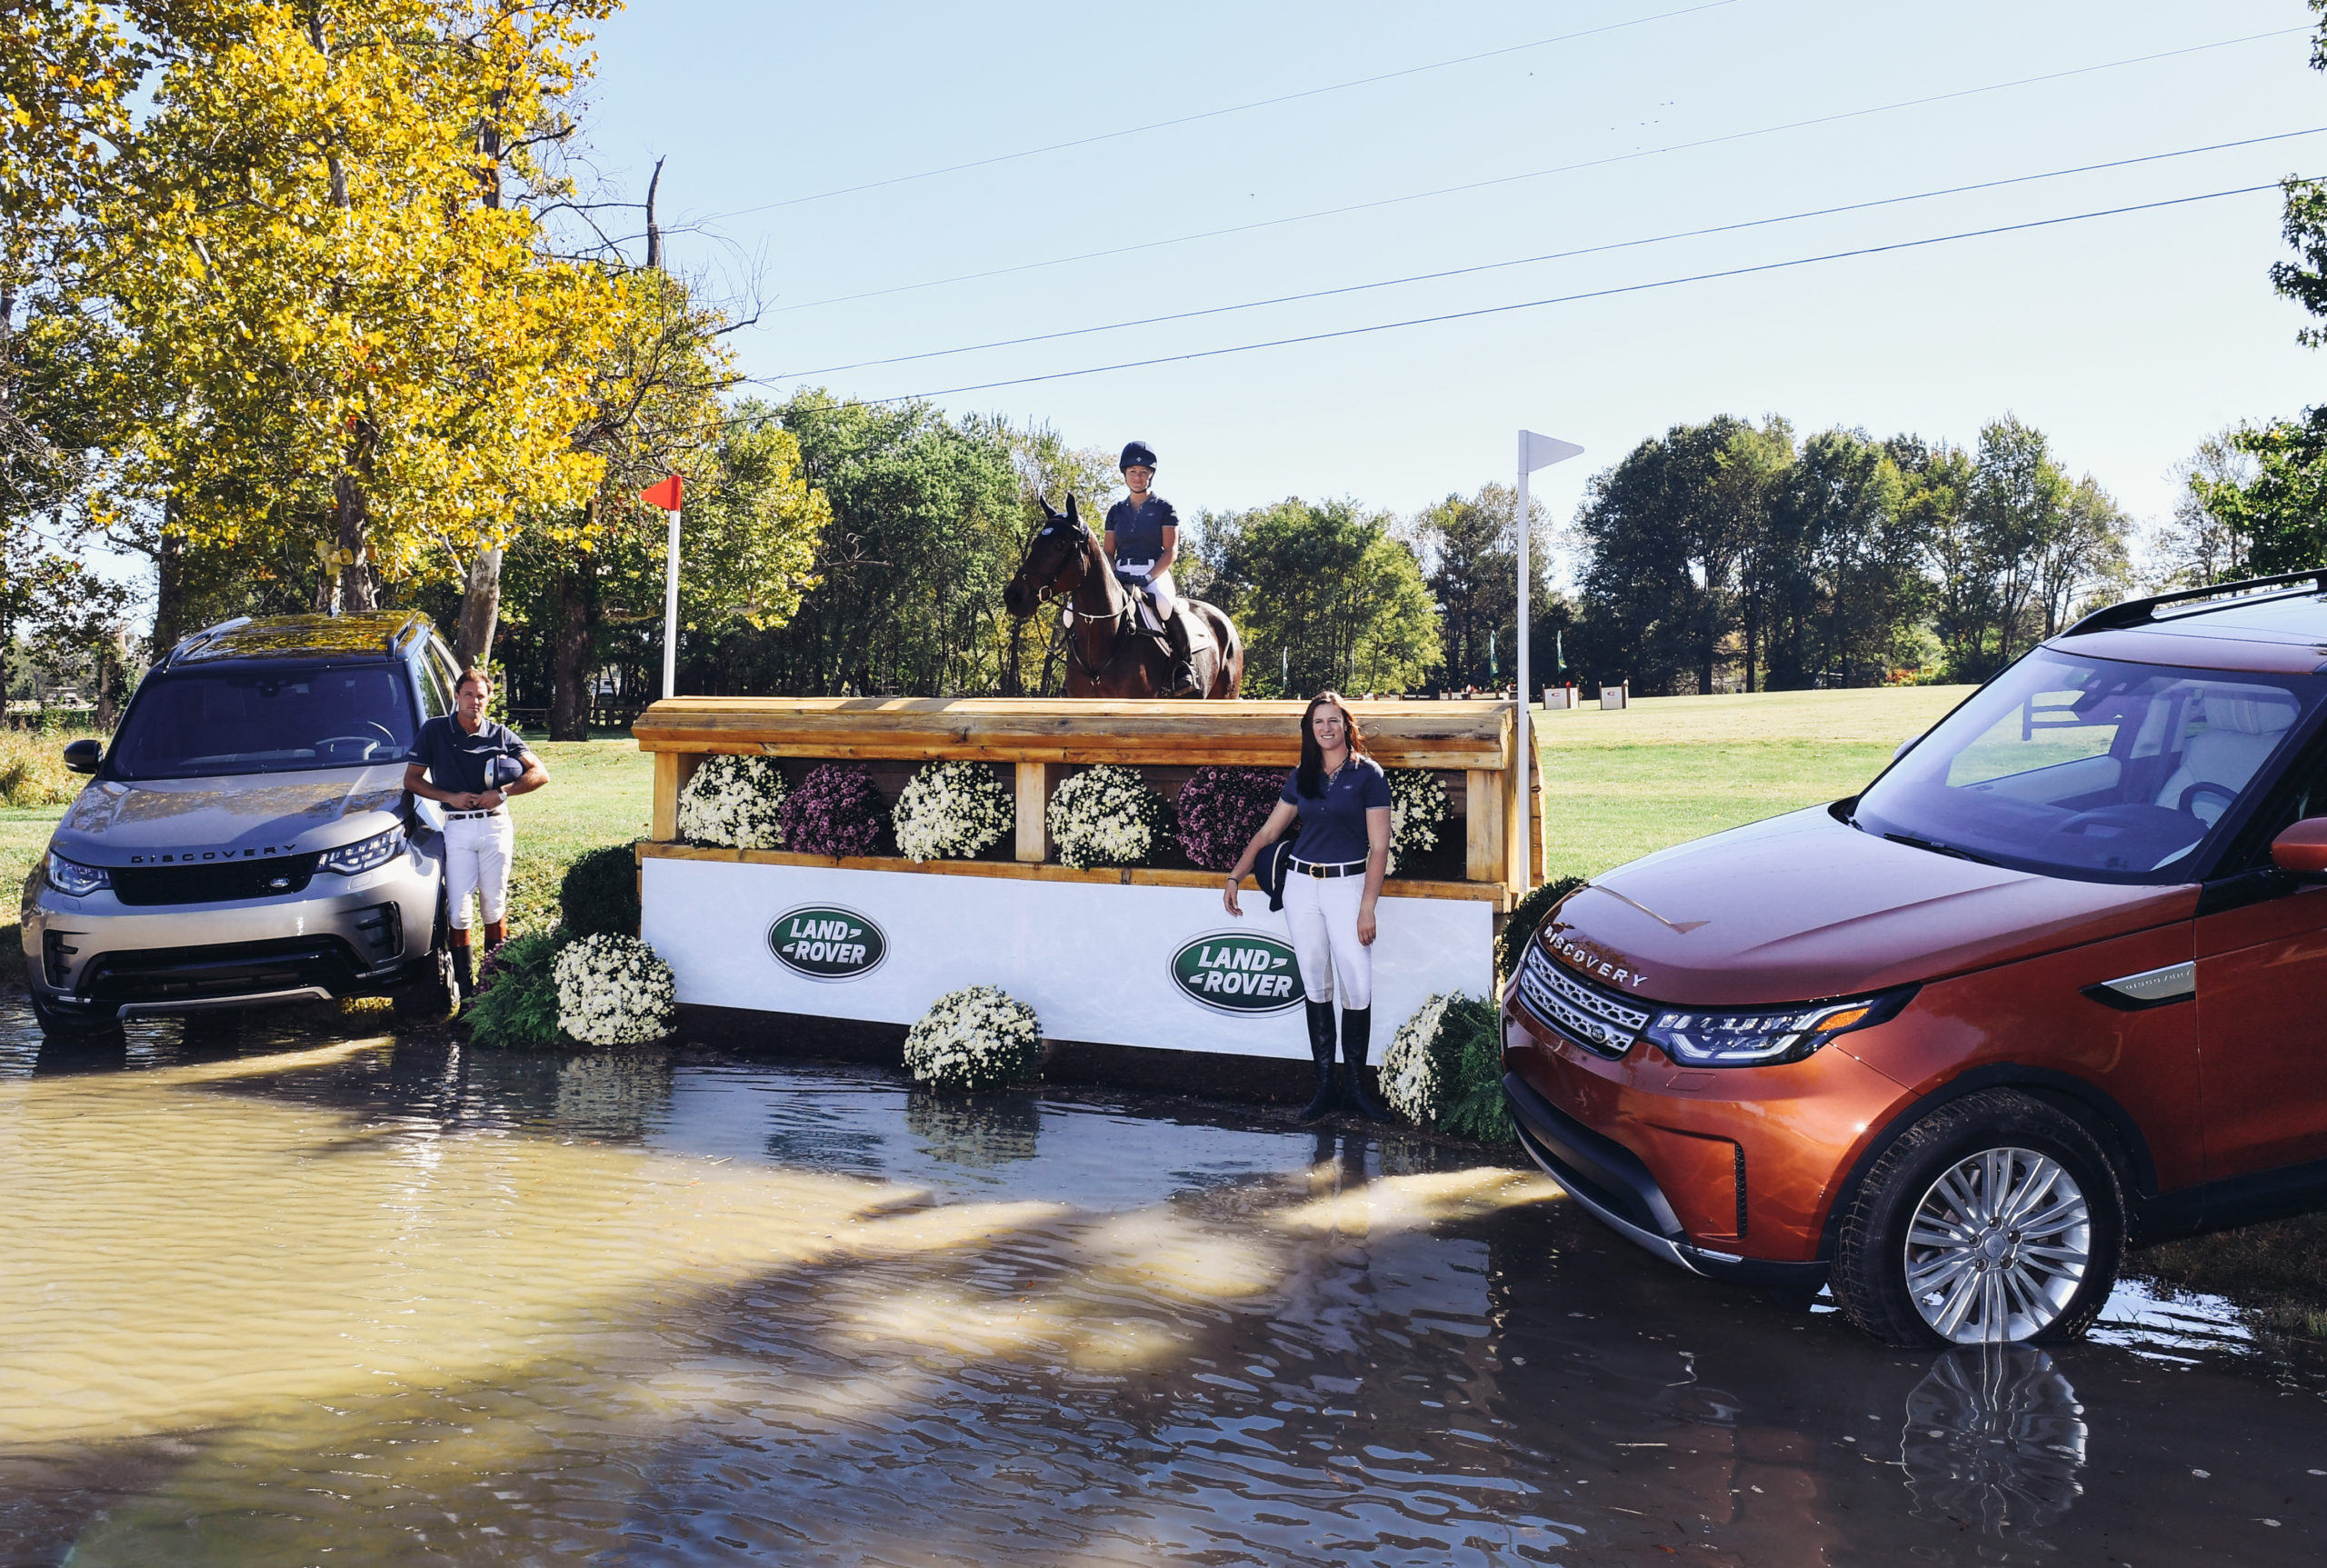 Land Rover North American Announces Title Sponsorship of Kentucky Three